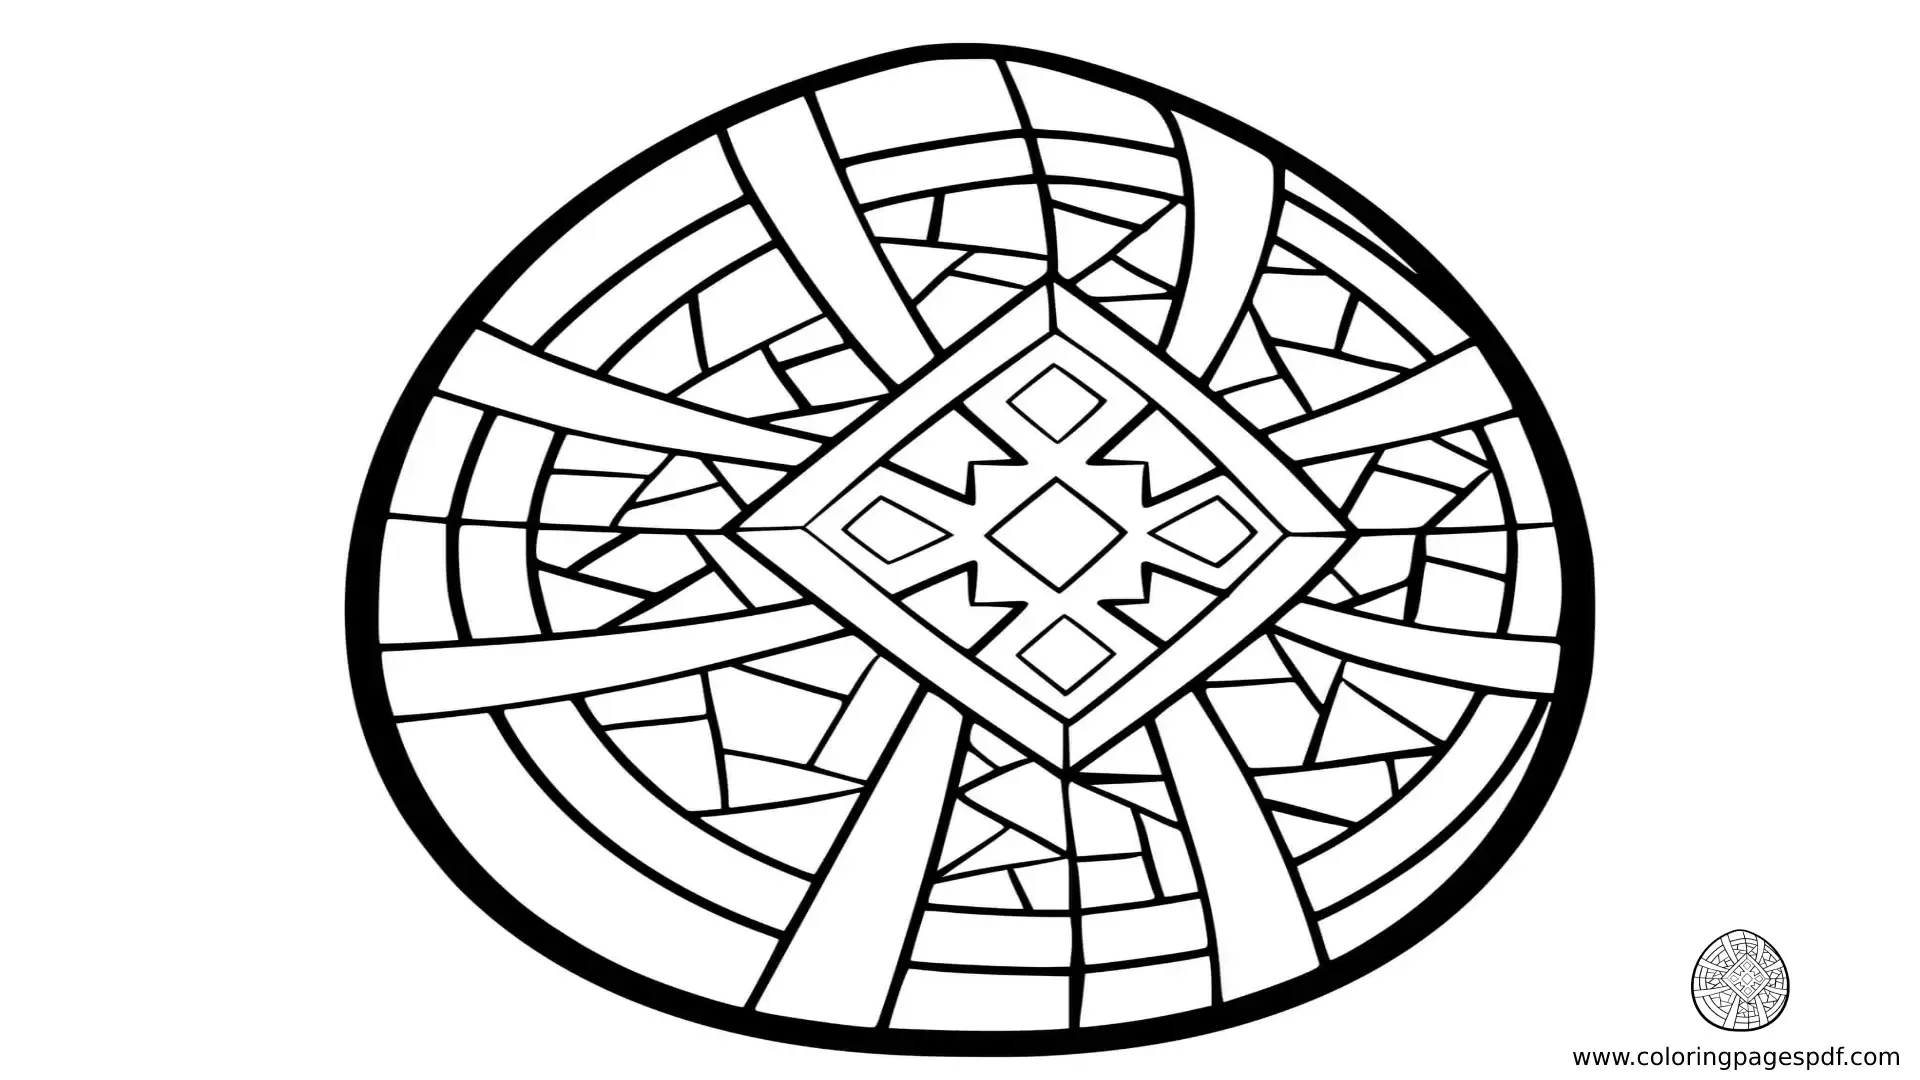 Coloring Pages Of A Diamond Easter Egg